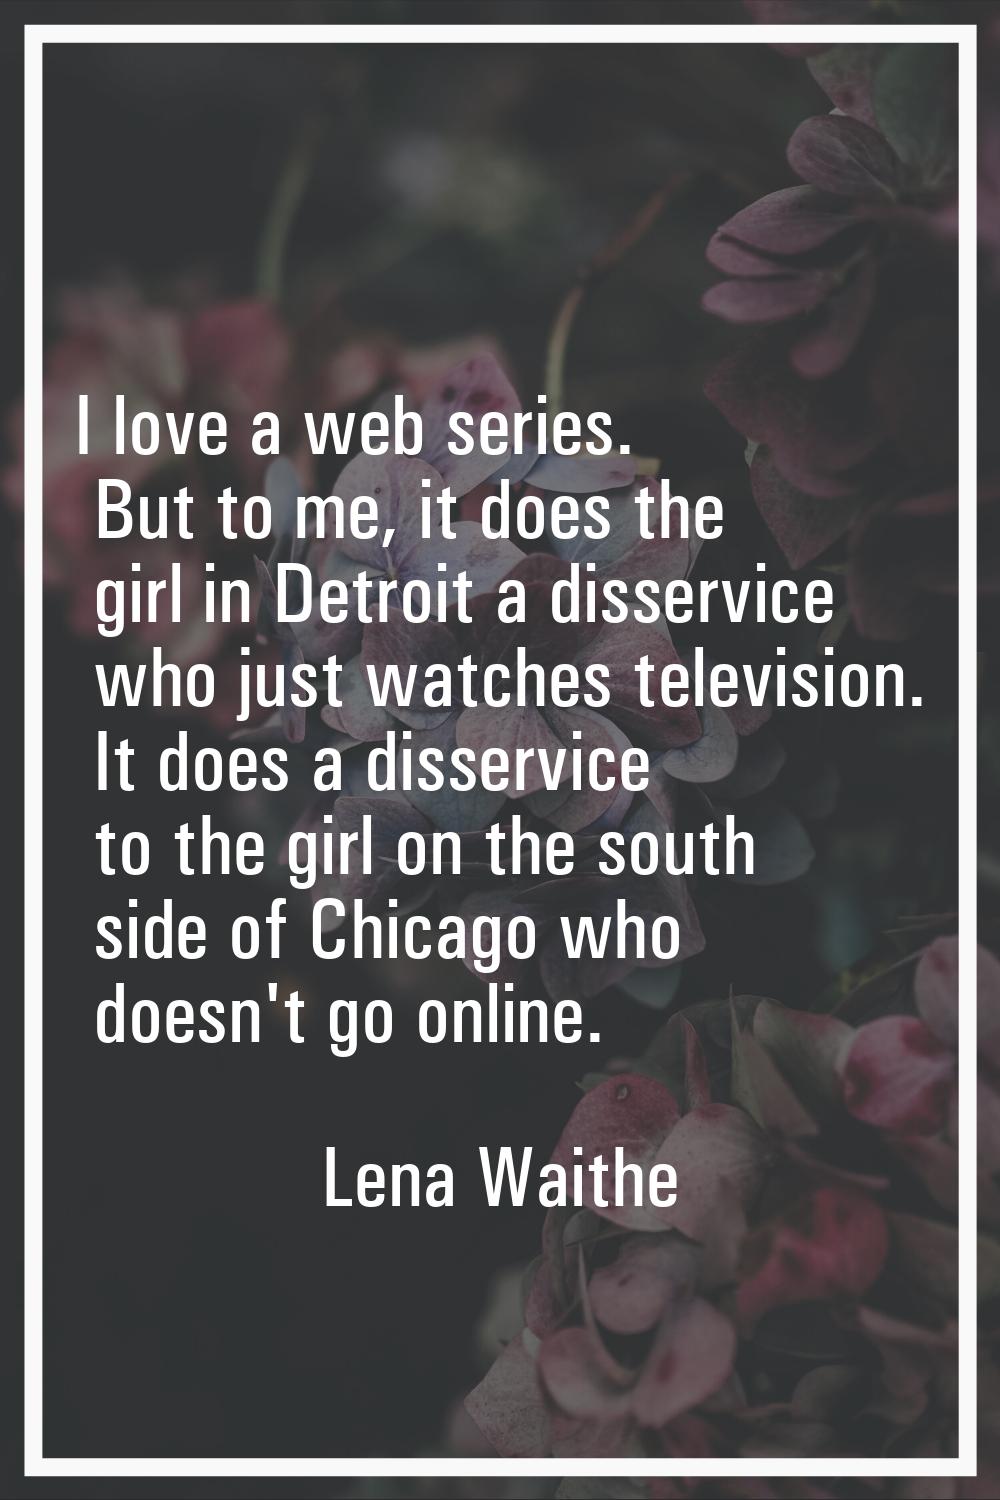 I love a web series. But to me, it does the girl in Detroit a disservice who just watches televisio